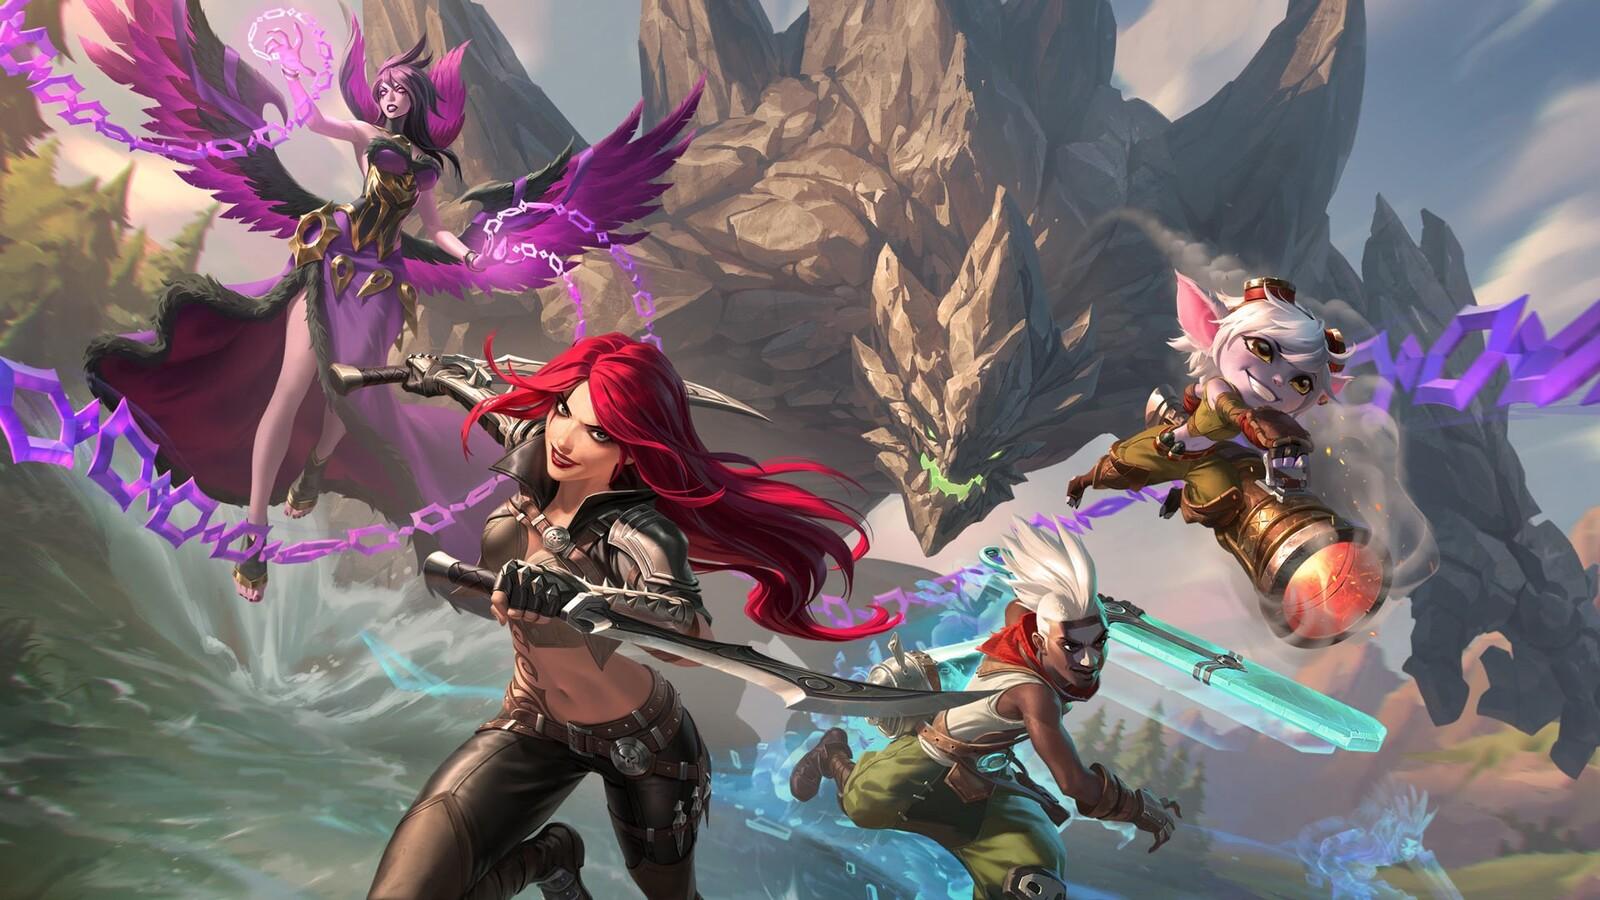 League of Legends Preseason 2023 will include huge changes to